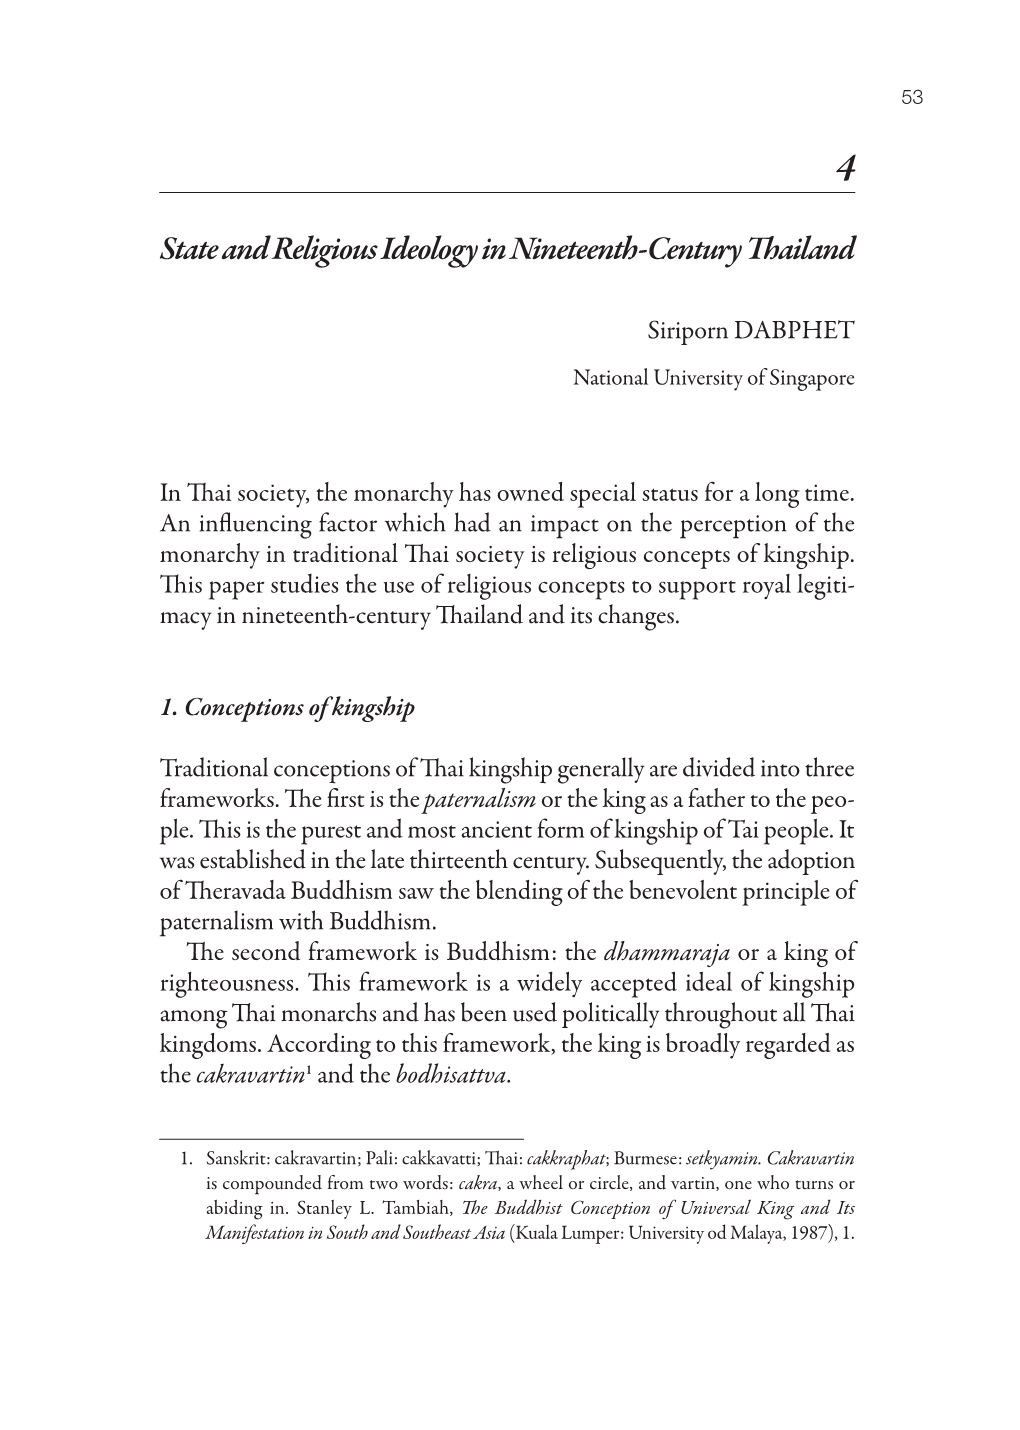 State and Religious Ideology in Nineteenth-Century Thailand